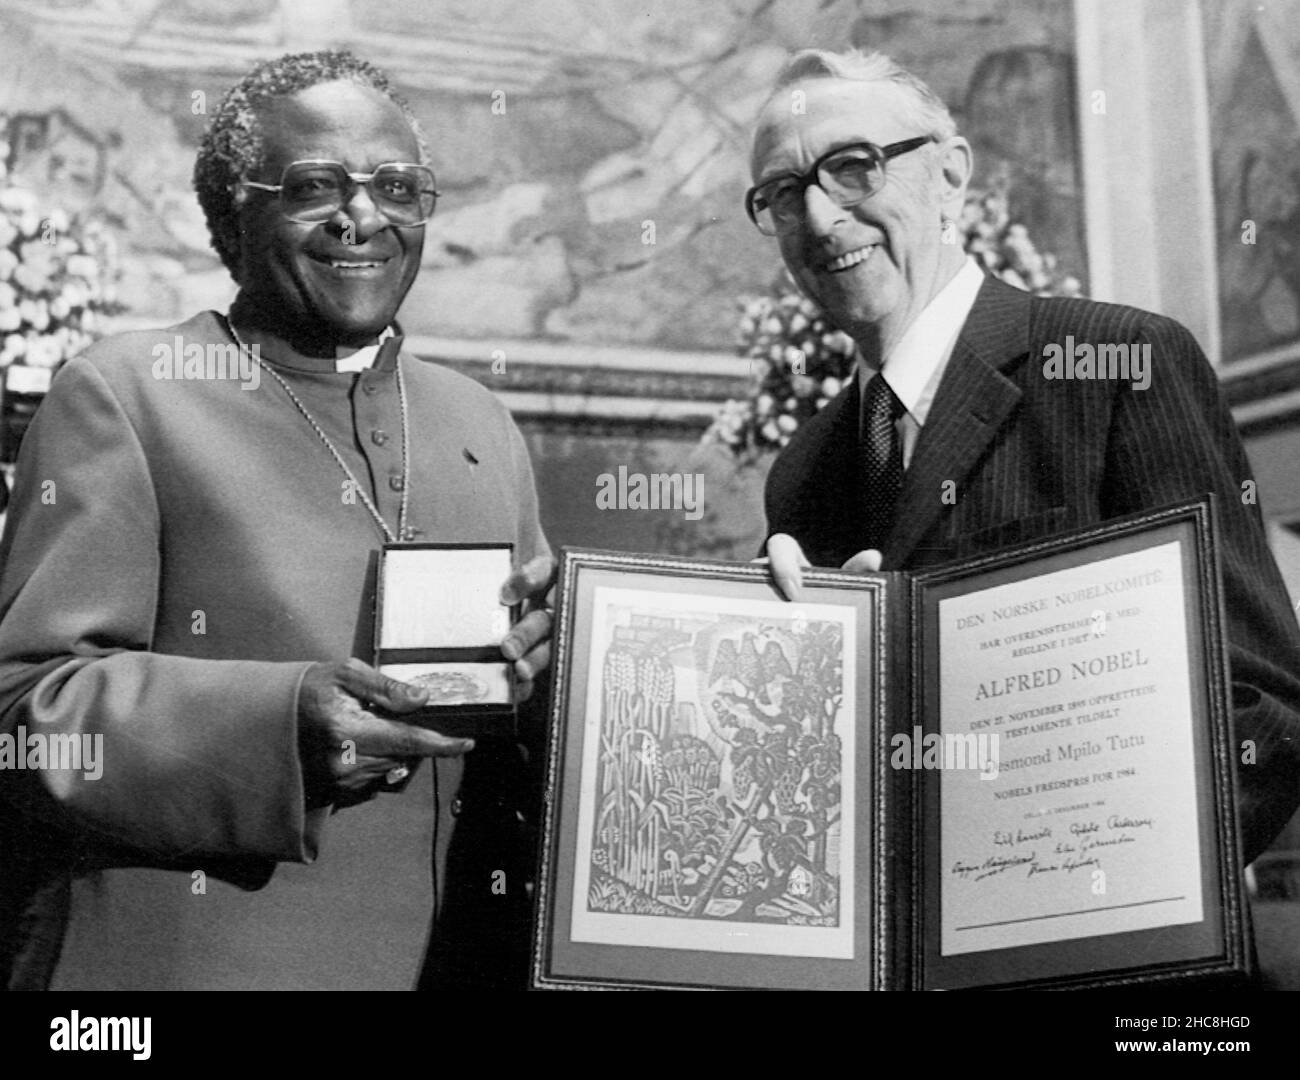 File NOBEL PEACE 1984 - Bishop Desmond Tutu, South Africa pictures together with chairman of the Norwegian Nobel Committee Egil Aarvik after he had received the Nobel Peace Prize for 1984.  Foto: NTB Kod: 414  COPYRIGHT SCANPIX SWEDEN Stock Photo